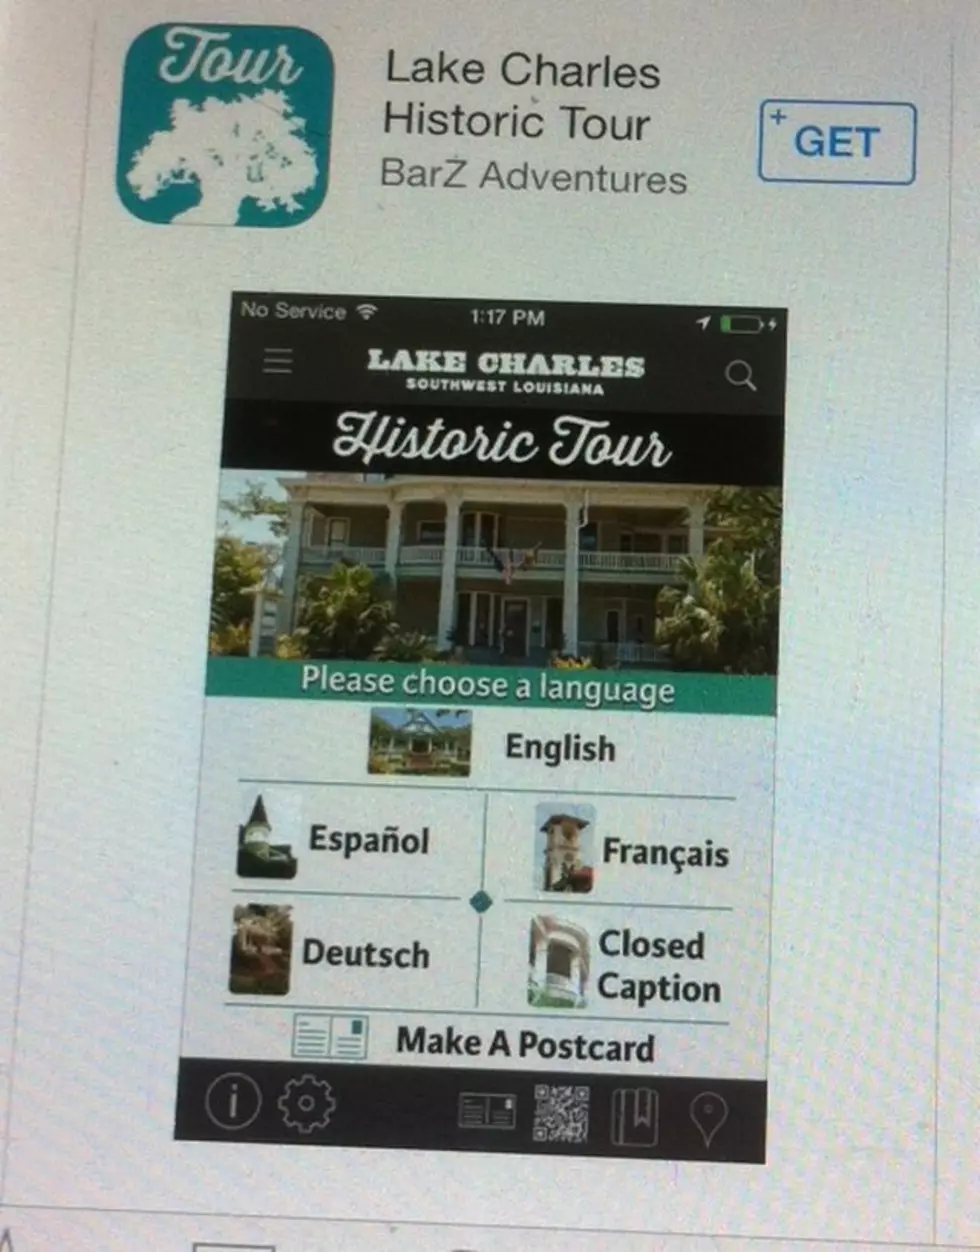 New App Shows Lake Charles History on Your Phone